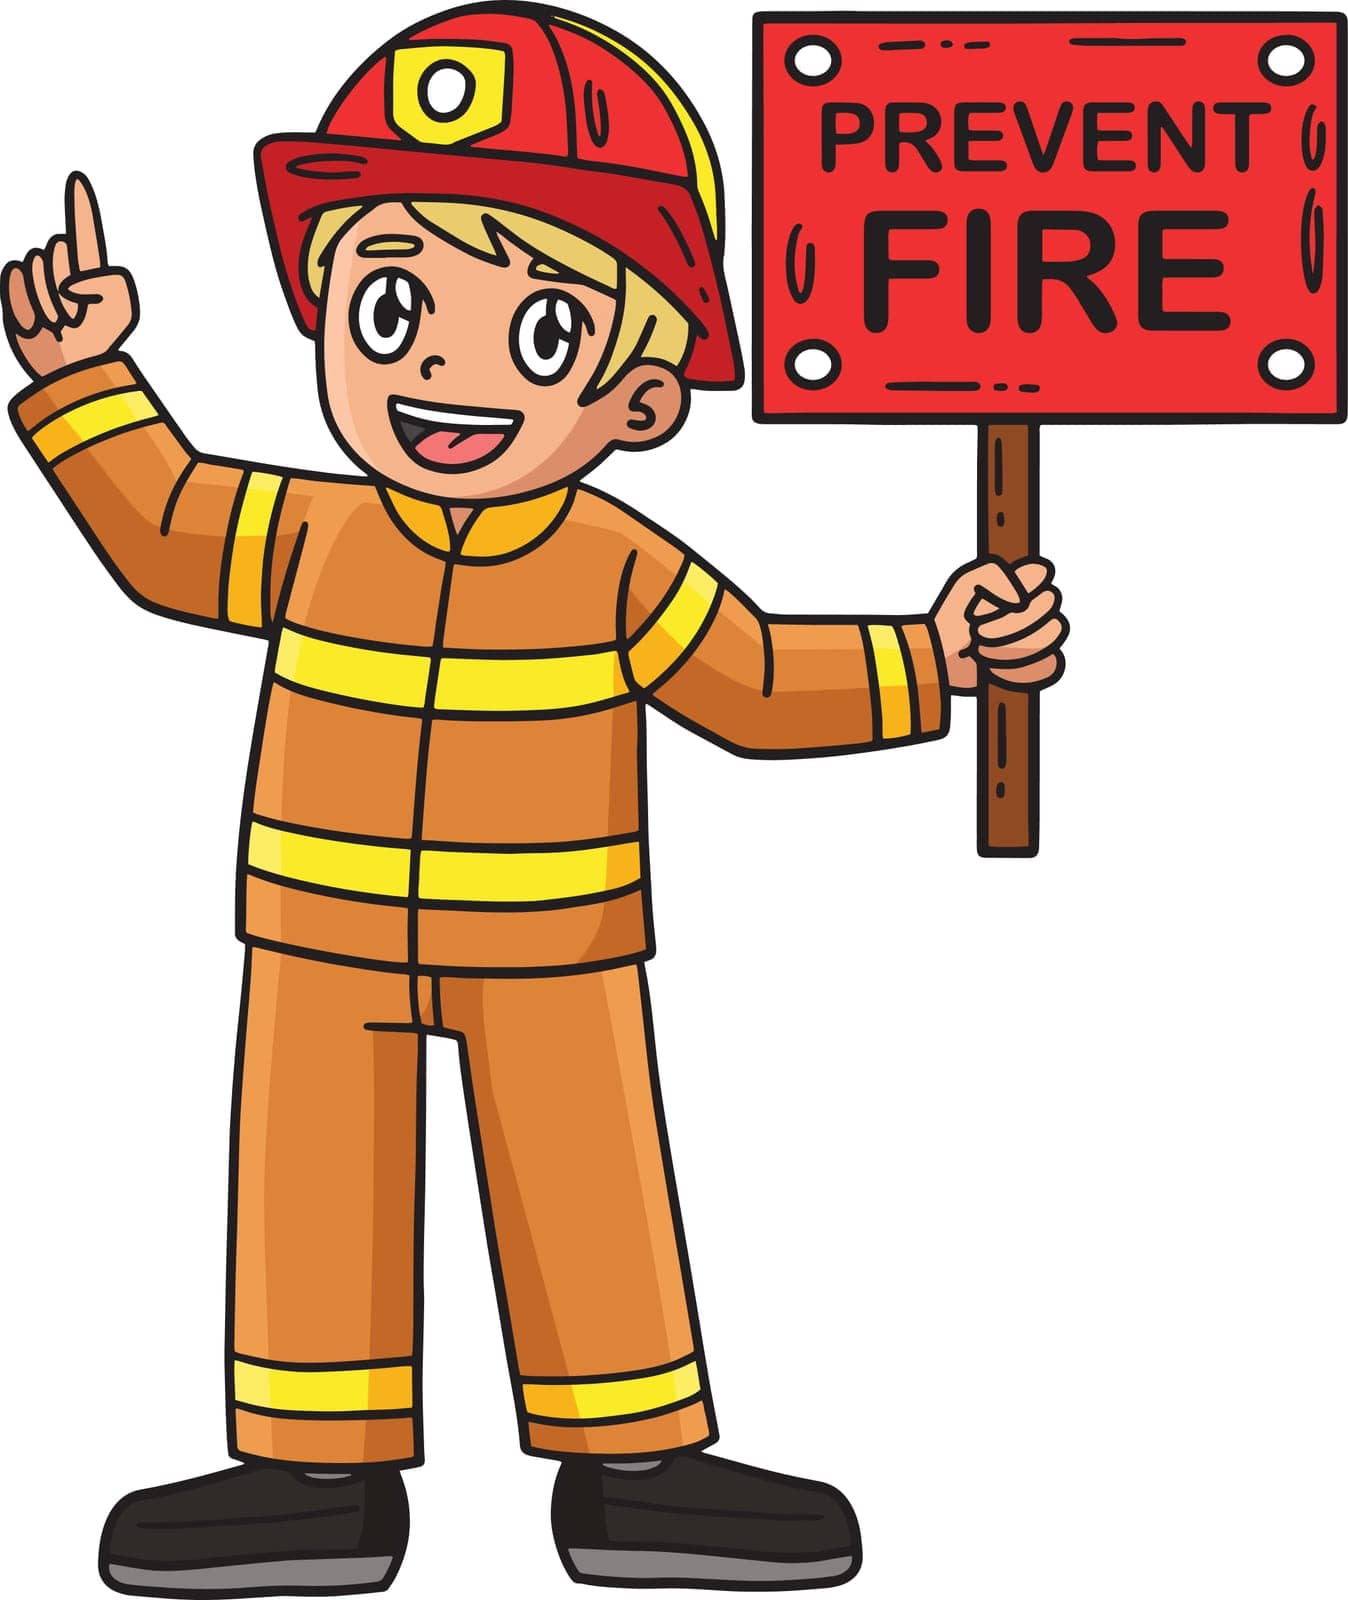 Firefighter Holding a Reminder Cartoon Clipart by abbydesign